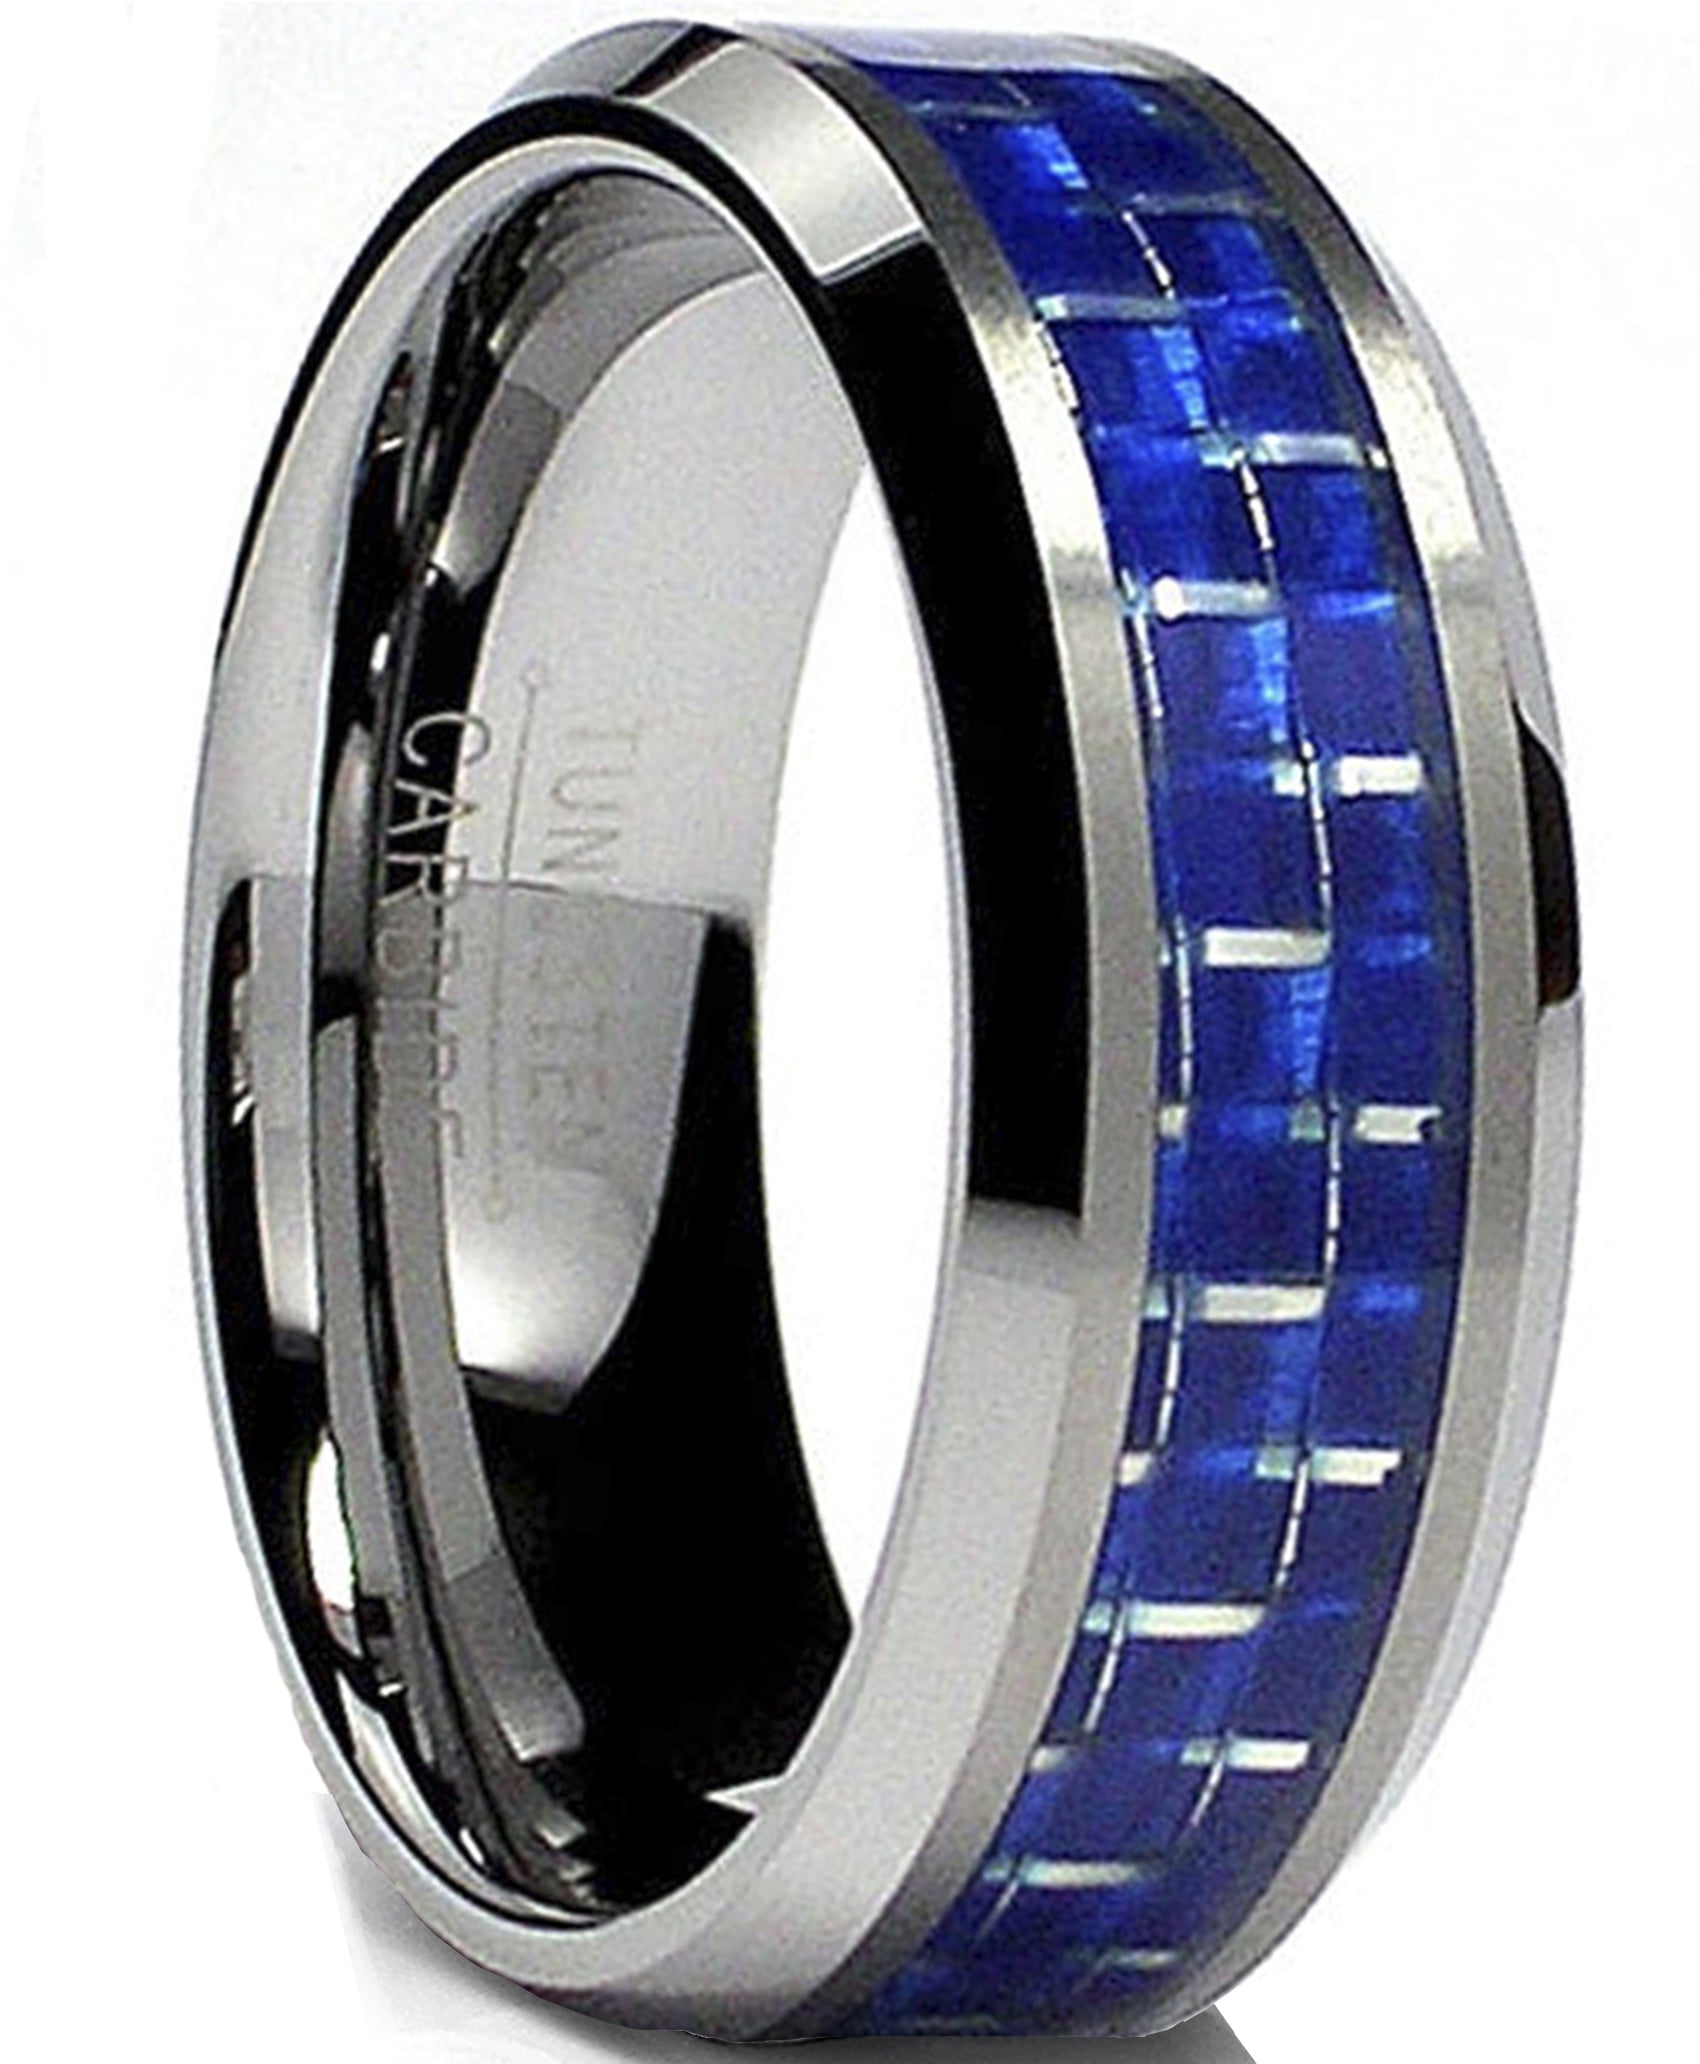 8 1/2 Blue Chip Unlimited Unisex 5mm Tungsten Carbide Ring with Black Carbon Fiber Inlay Wedding Band Size 8.5